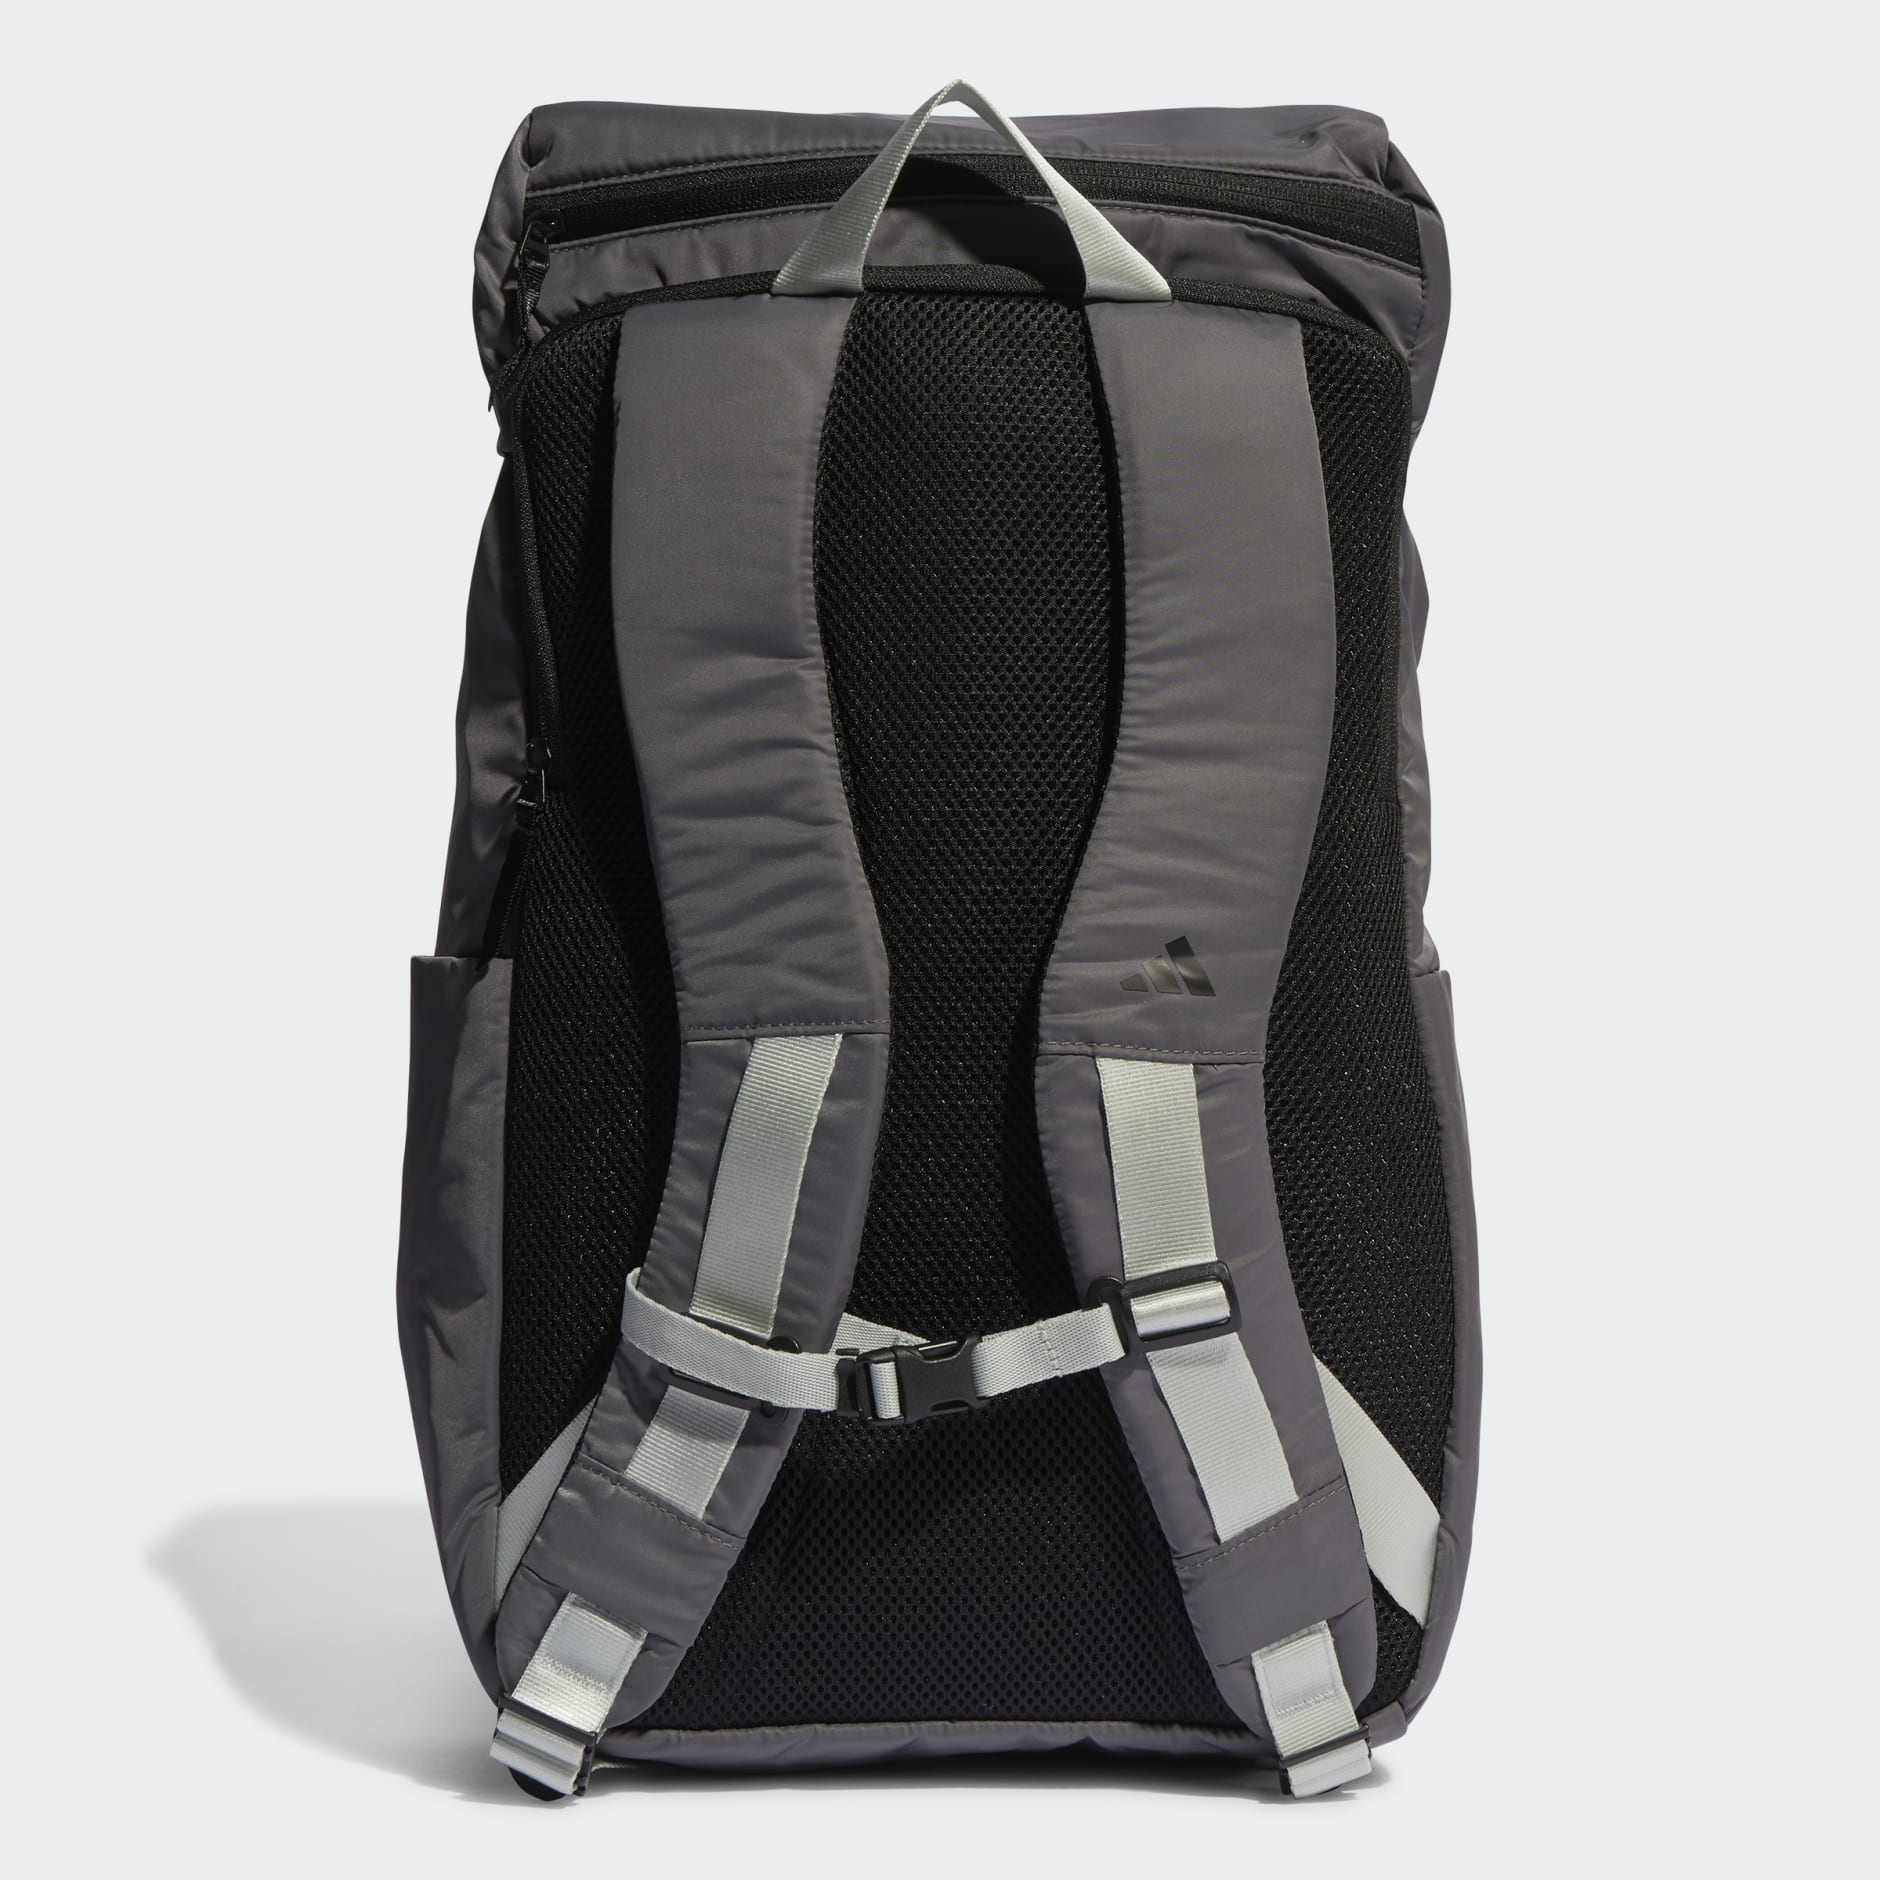 Accessories - Gym High-Intensity Backpack - Grey | adidas South Africa